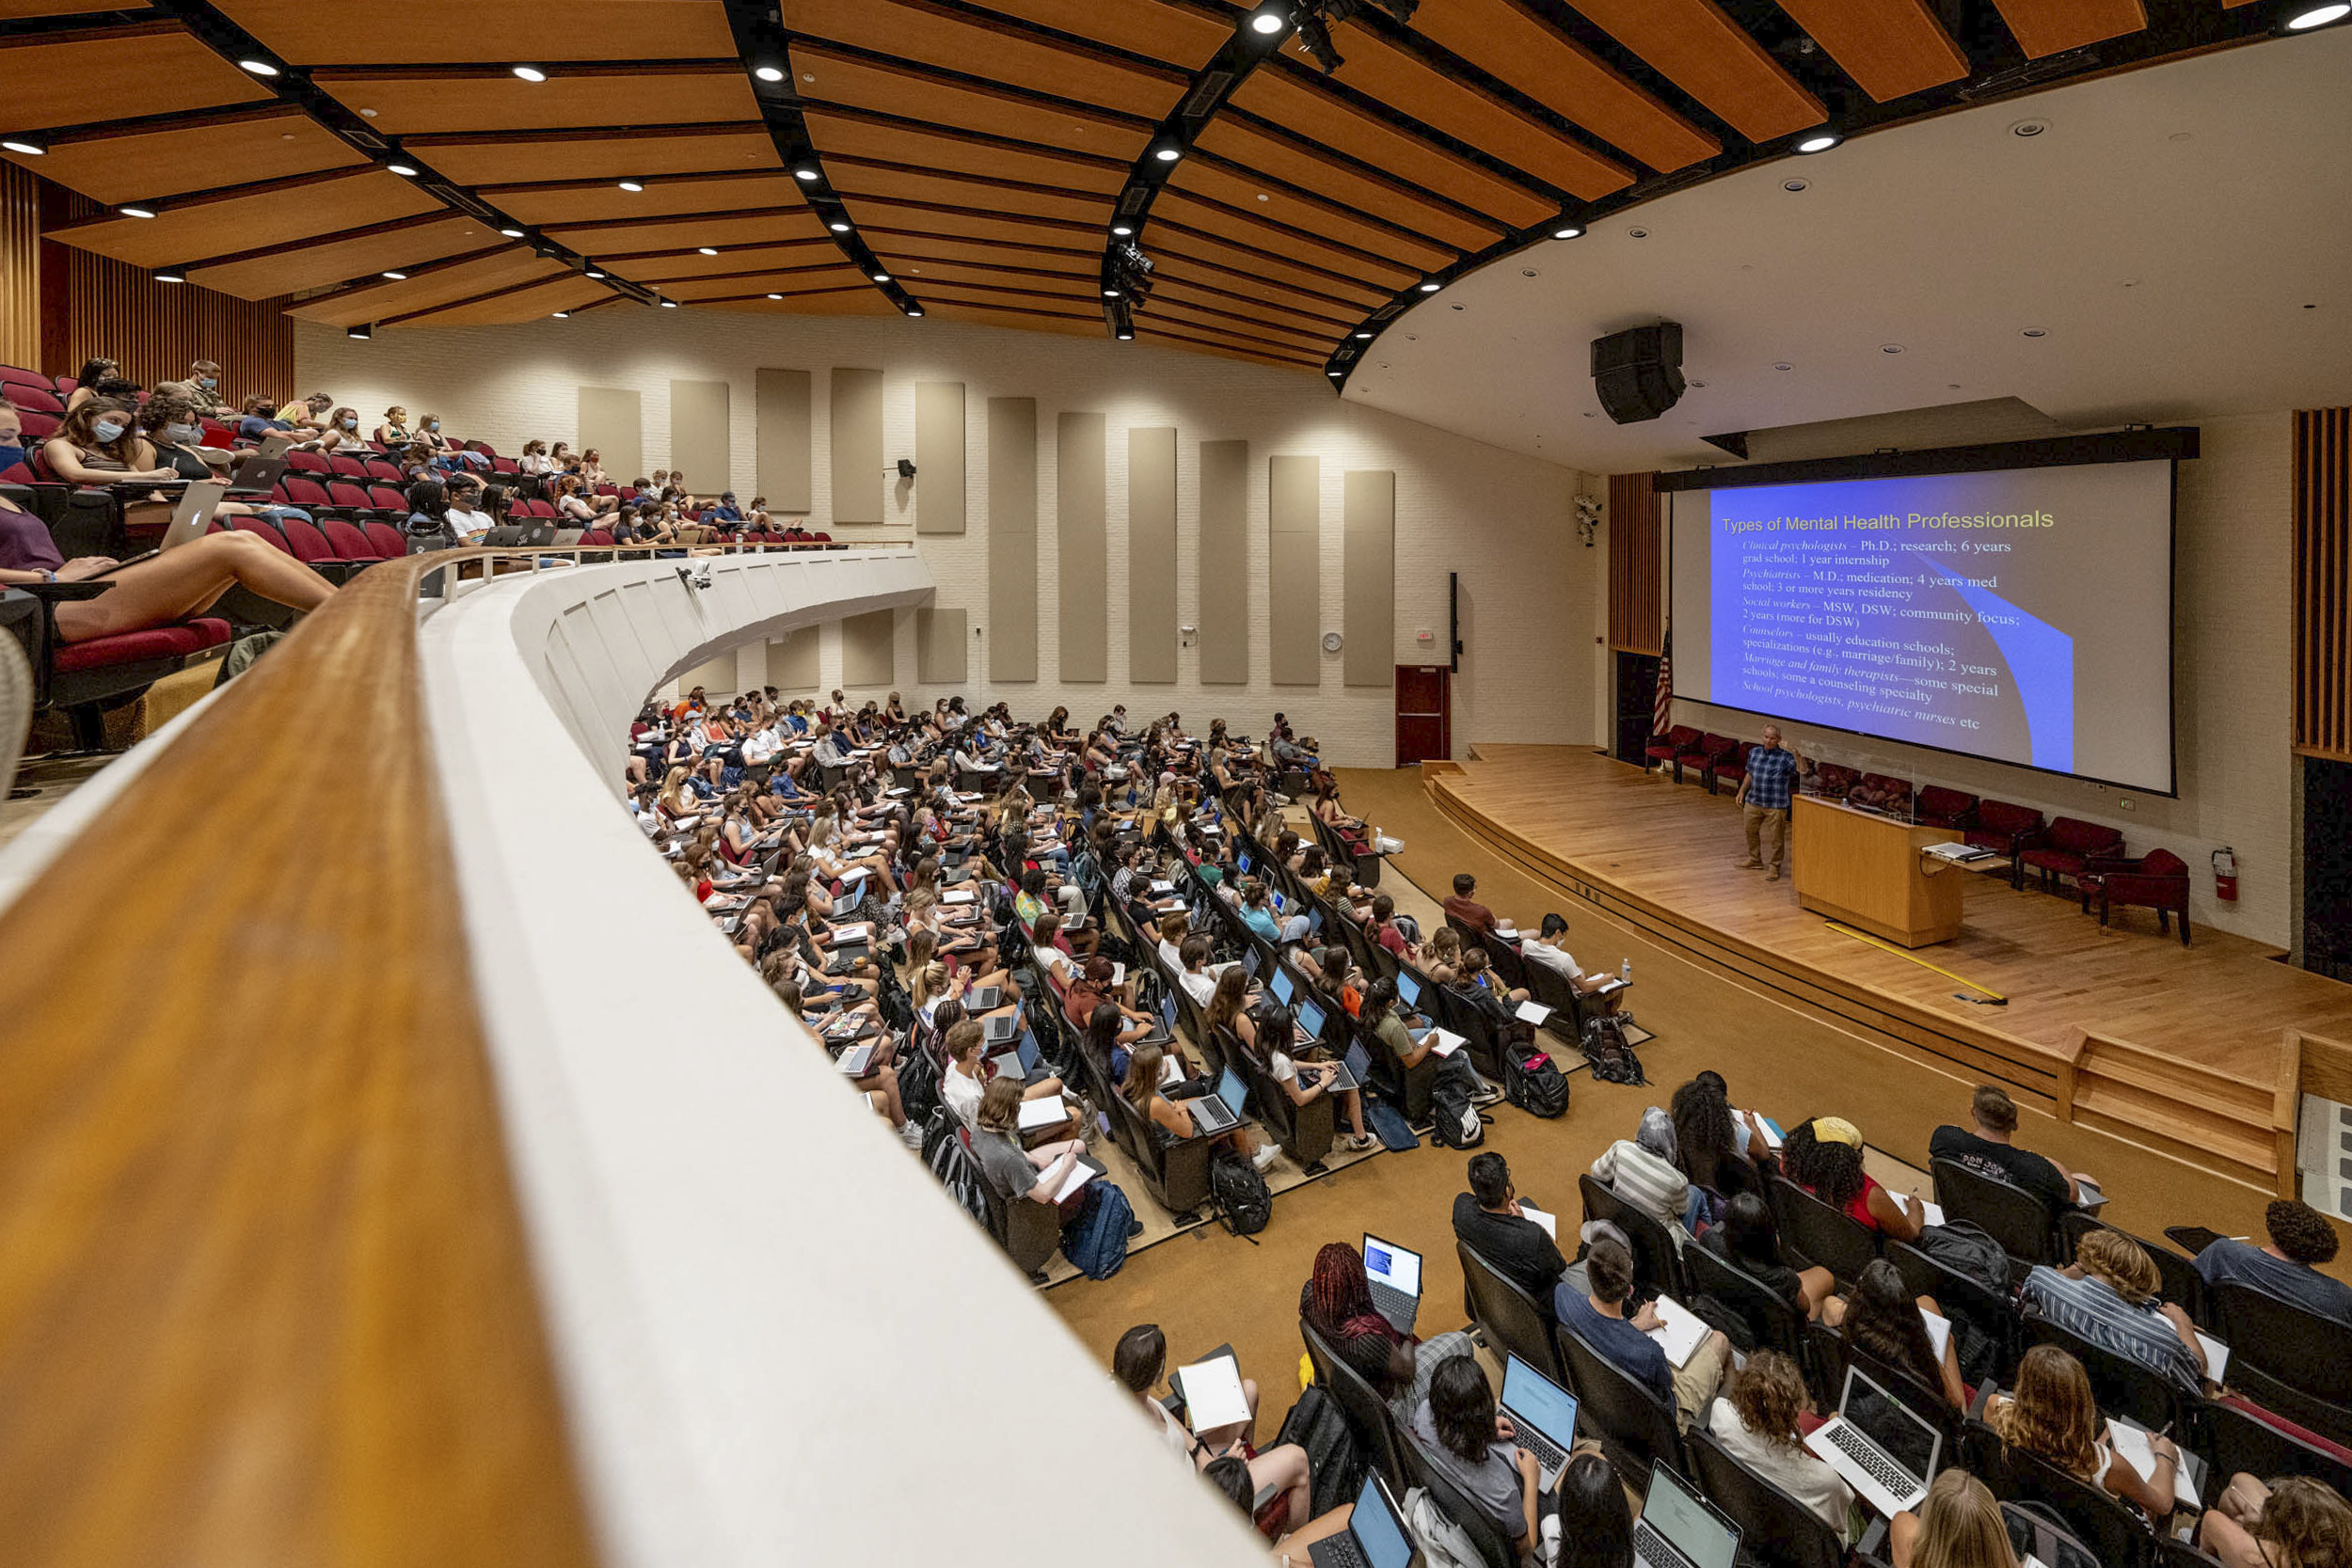 Robert Emery standing on a stage teaching to a full lecture hall